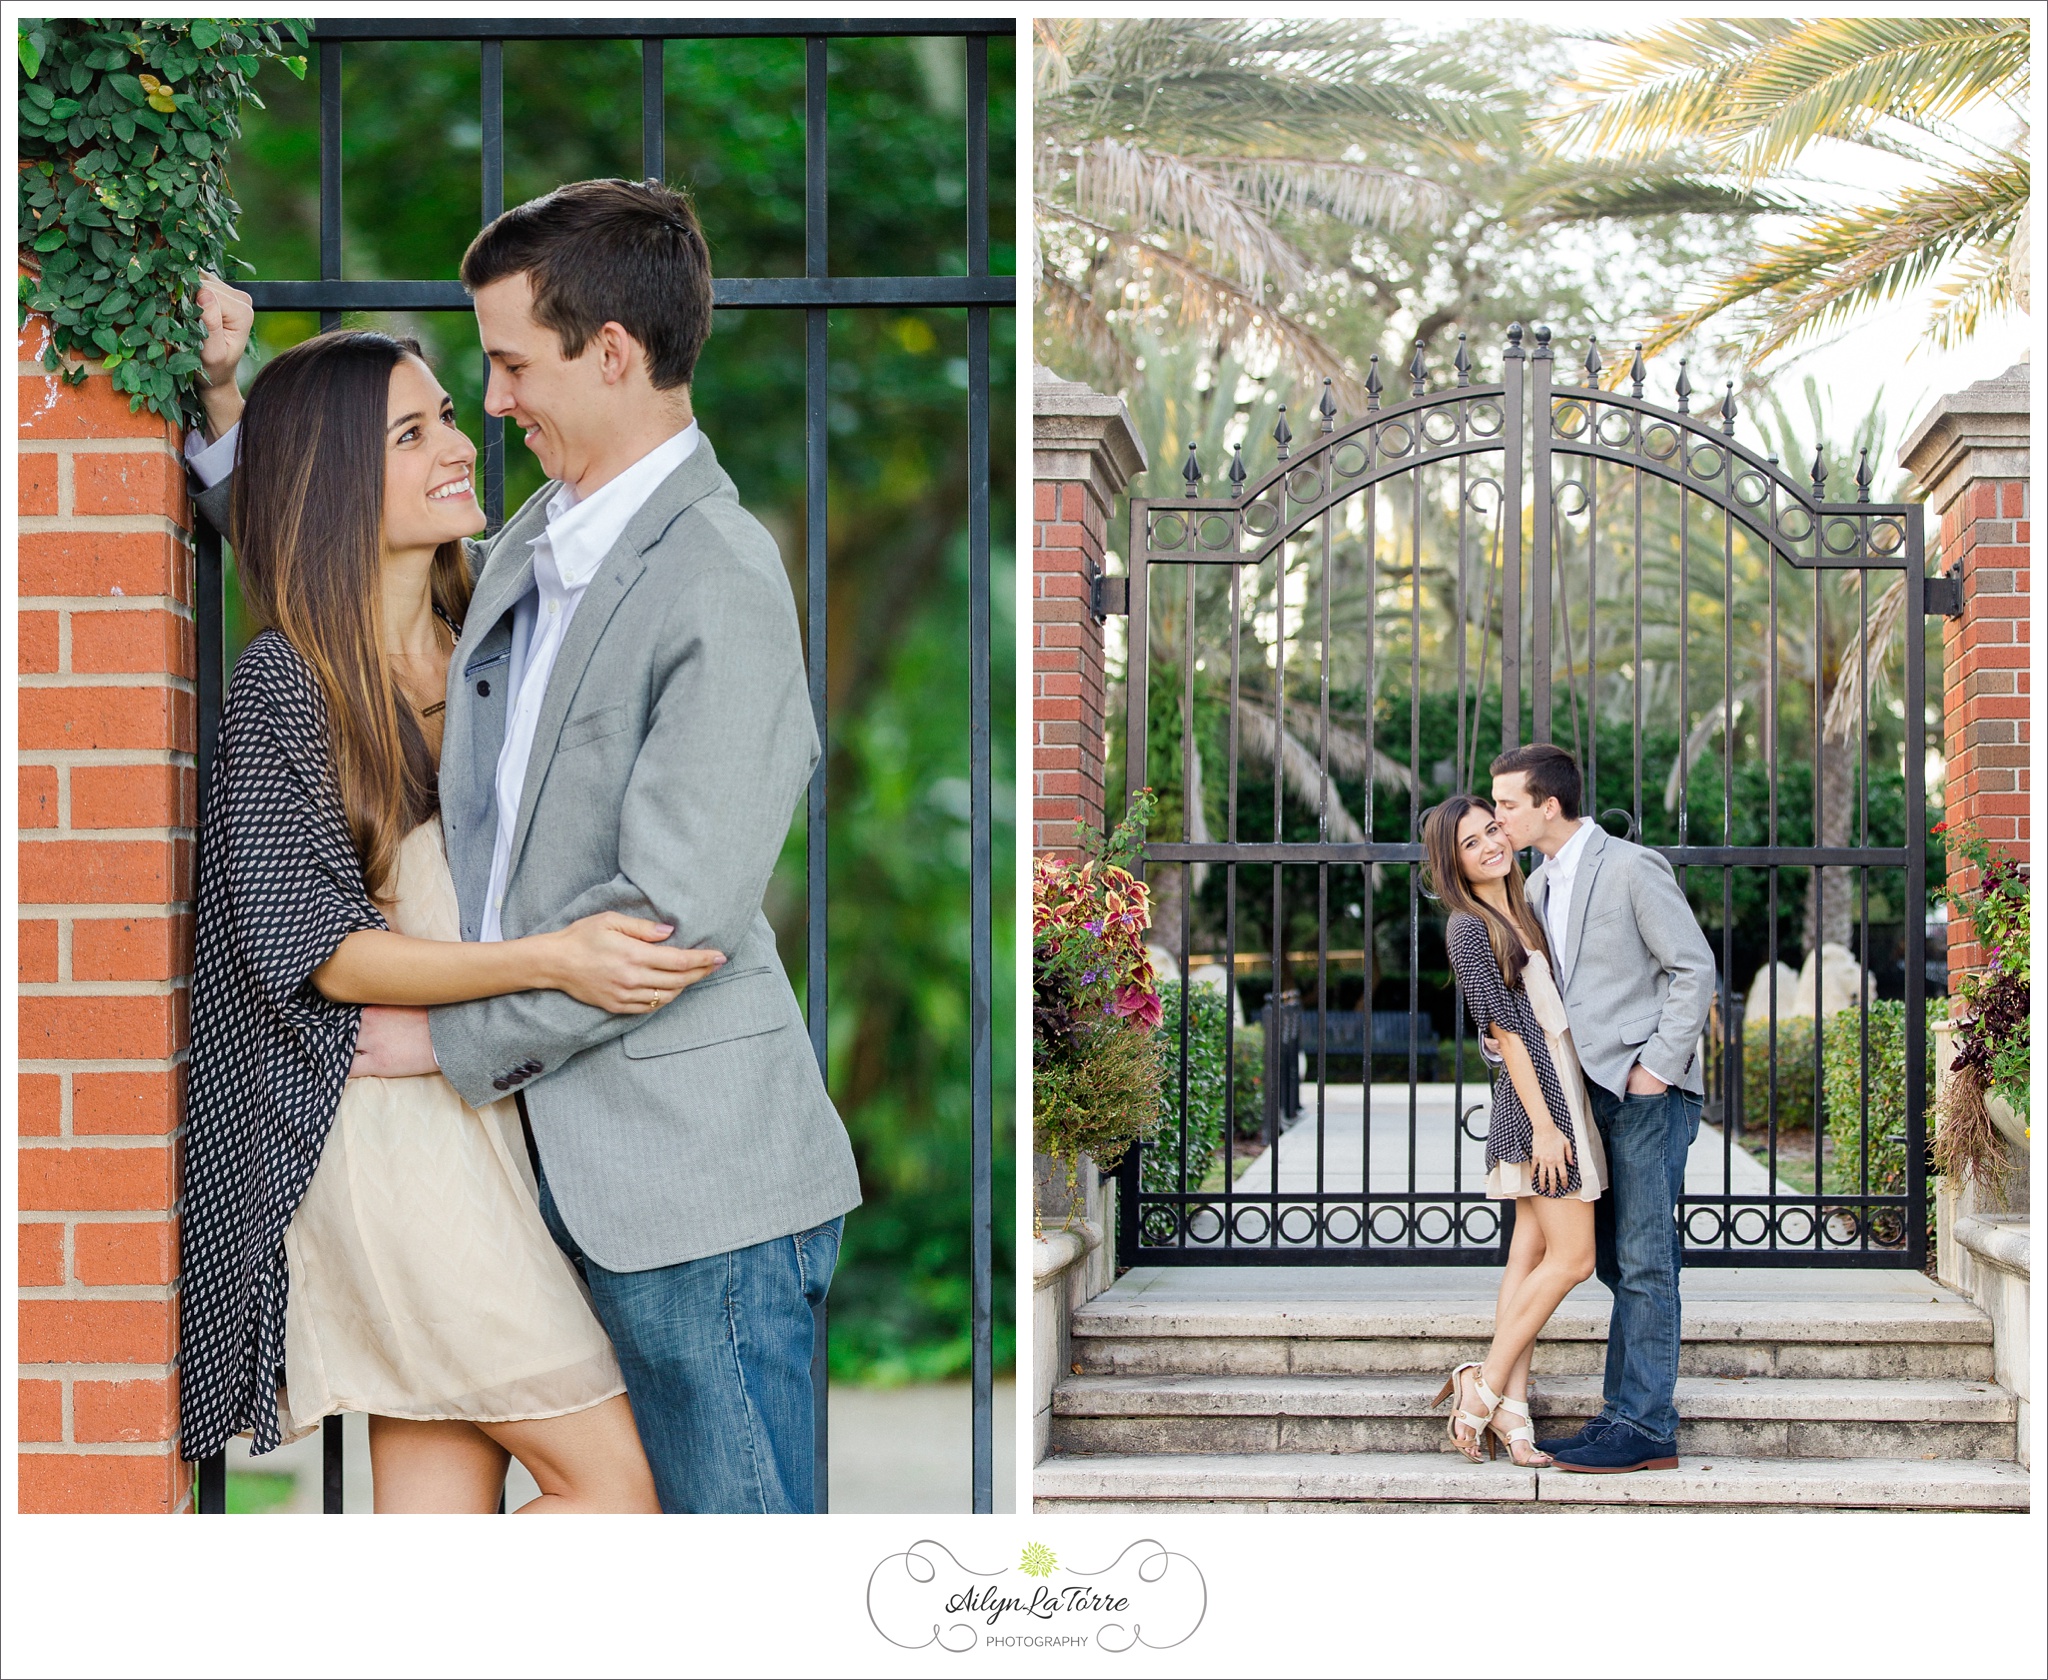 South Tampa Engagement | © Ailyn La Torre Photography 2014